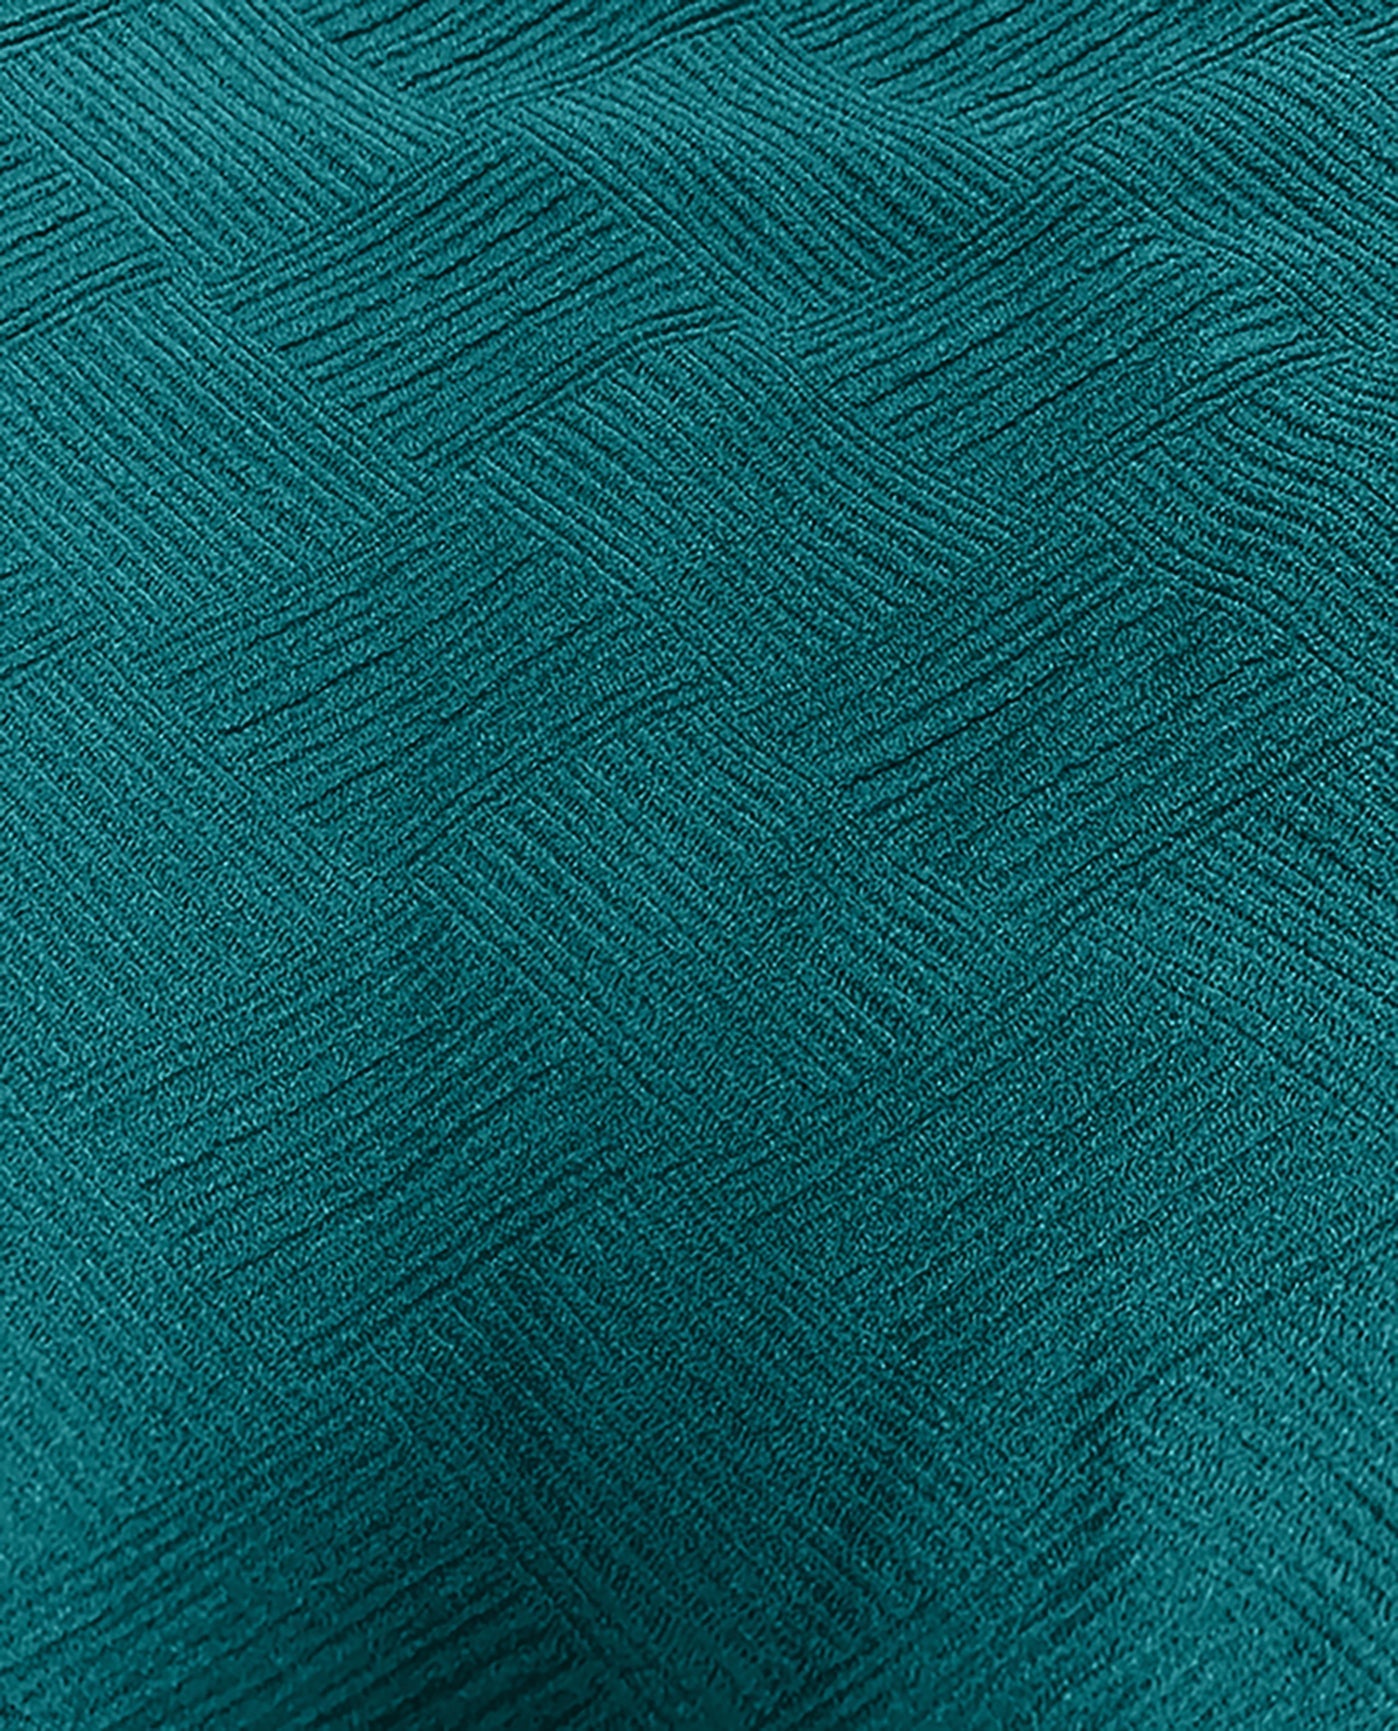 FABRIC SWATCH VIEW OF CHLORINE RESISTANT AQUAMORE SOLID SIGNATURE TEXTURED HIGH NECK PLUS SIZE SWIMSUIT | 010L AQS SIGNATURE DEEP OCEAN